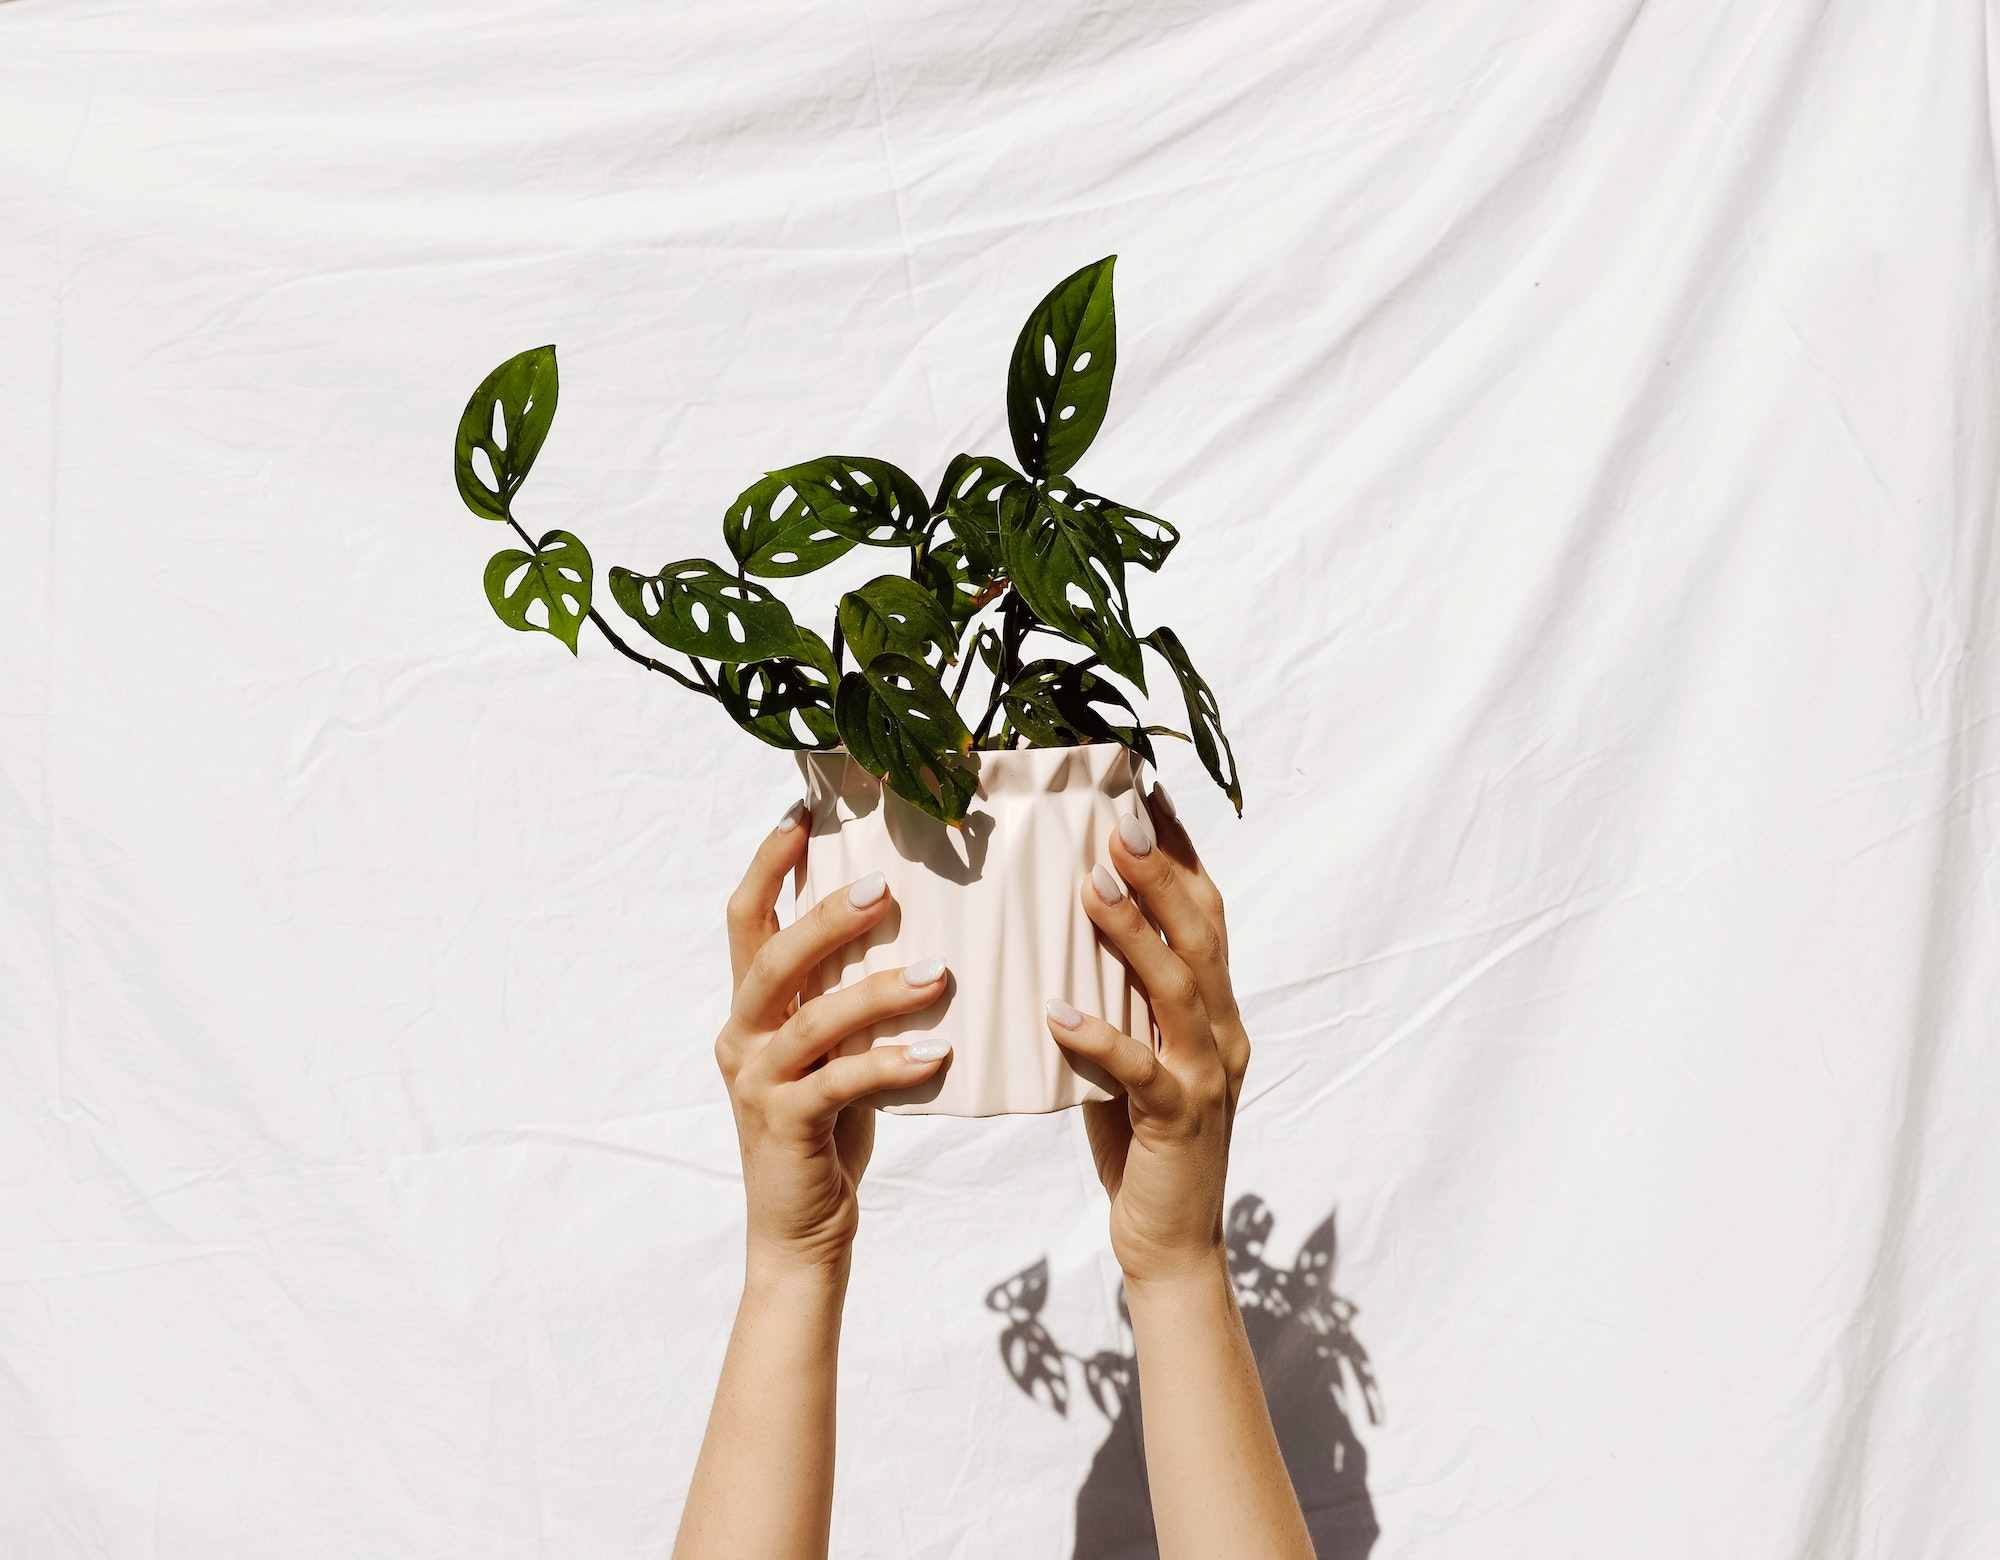 Do something different this Mother's Day by sending her a plant instead of flowers